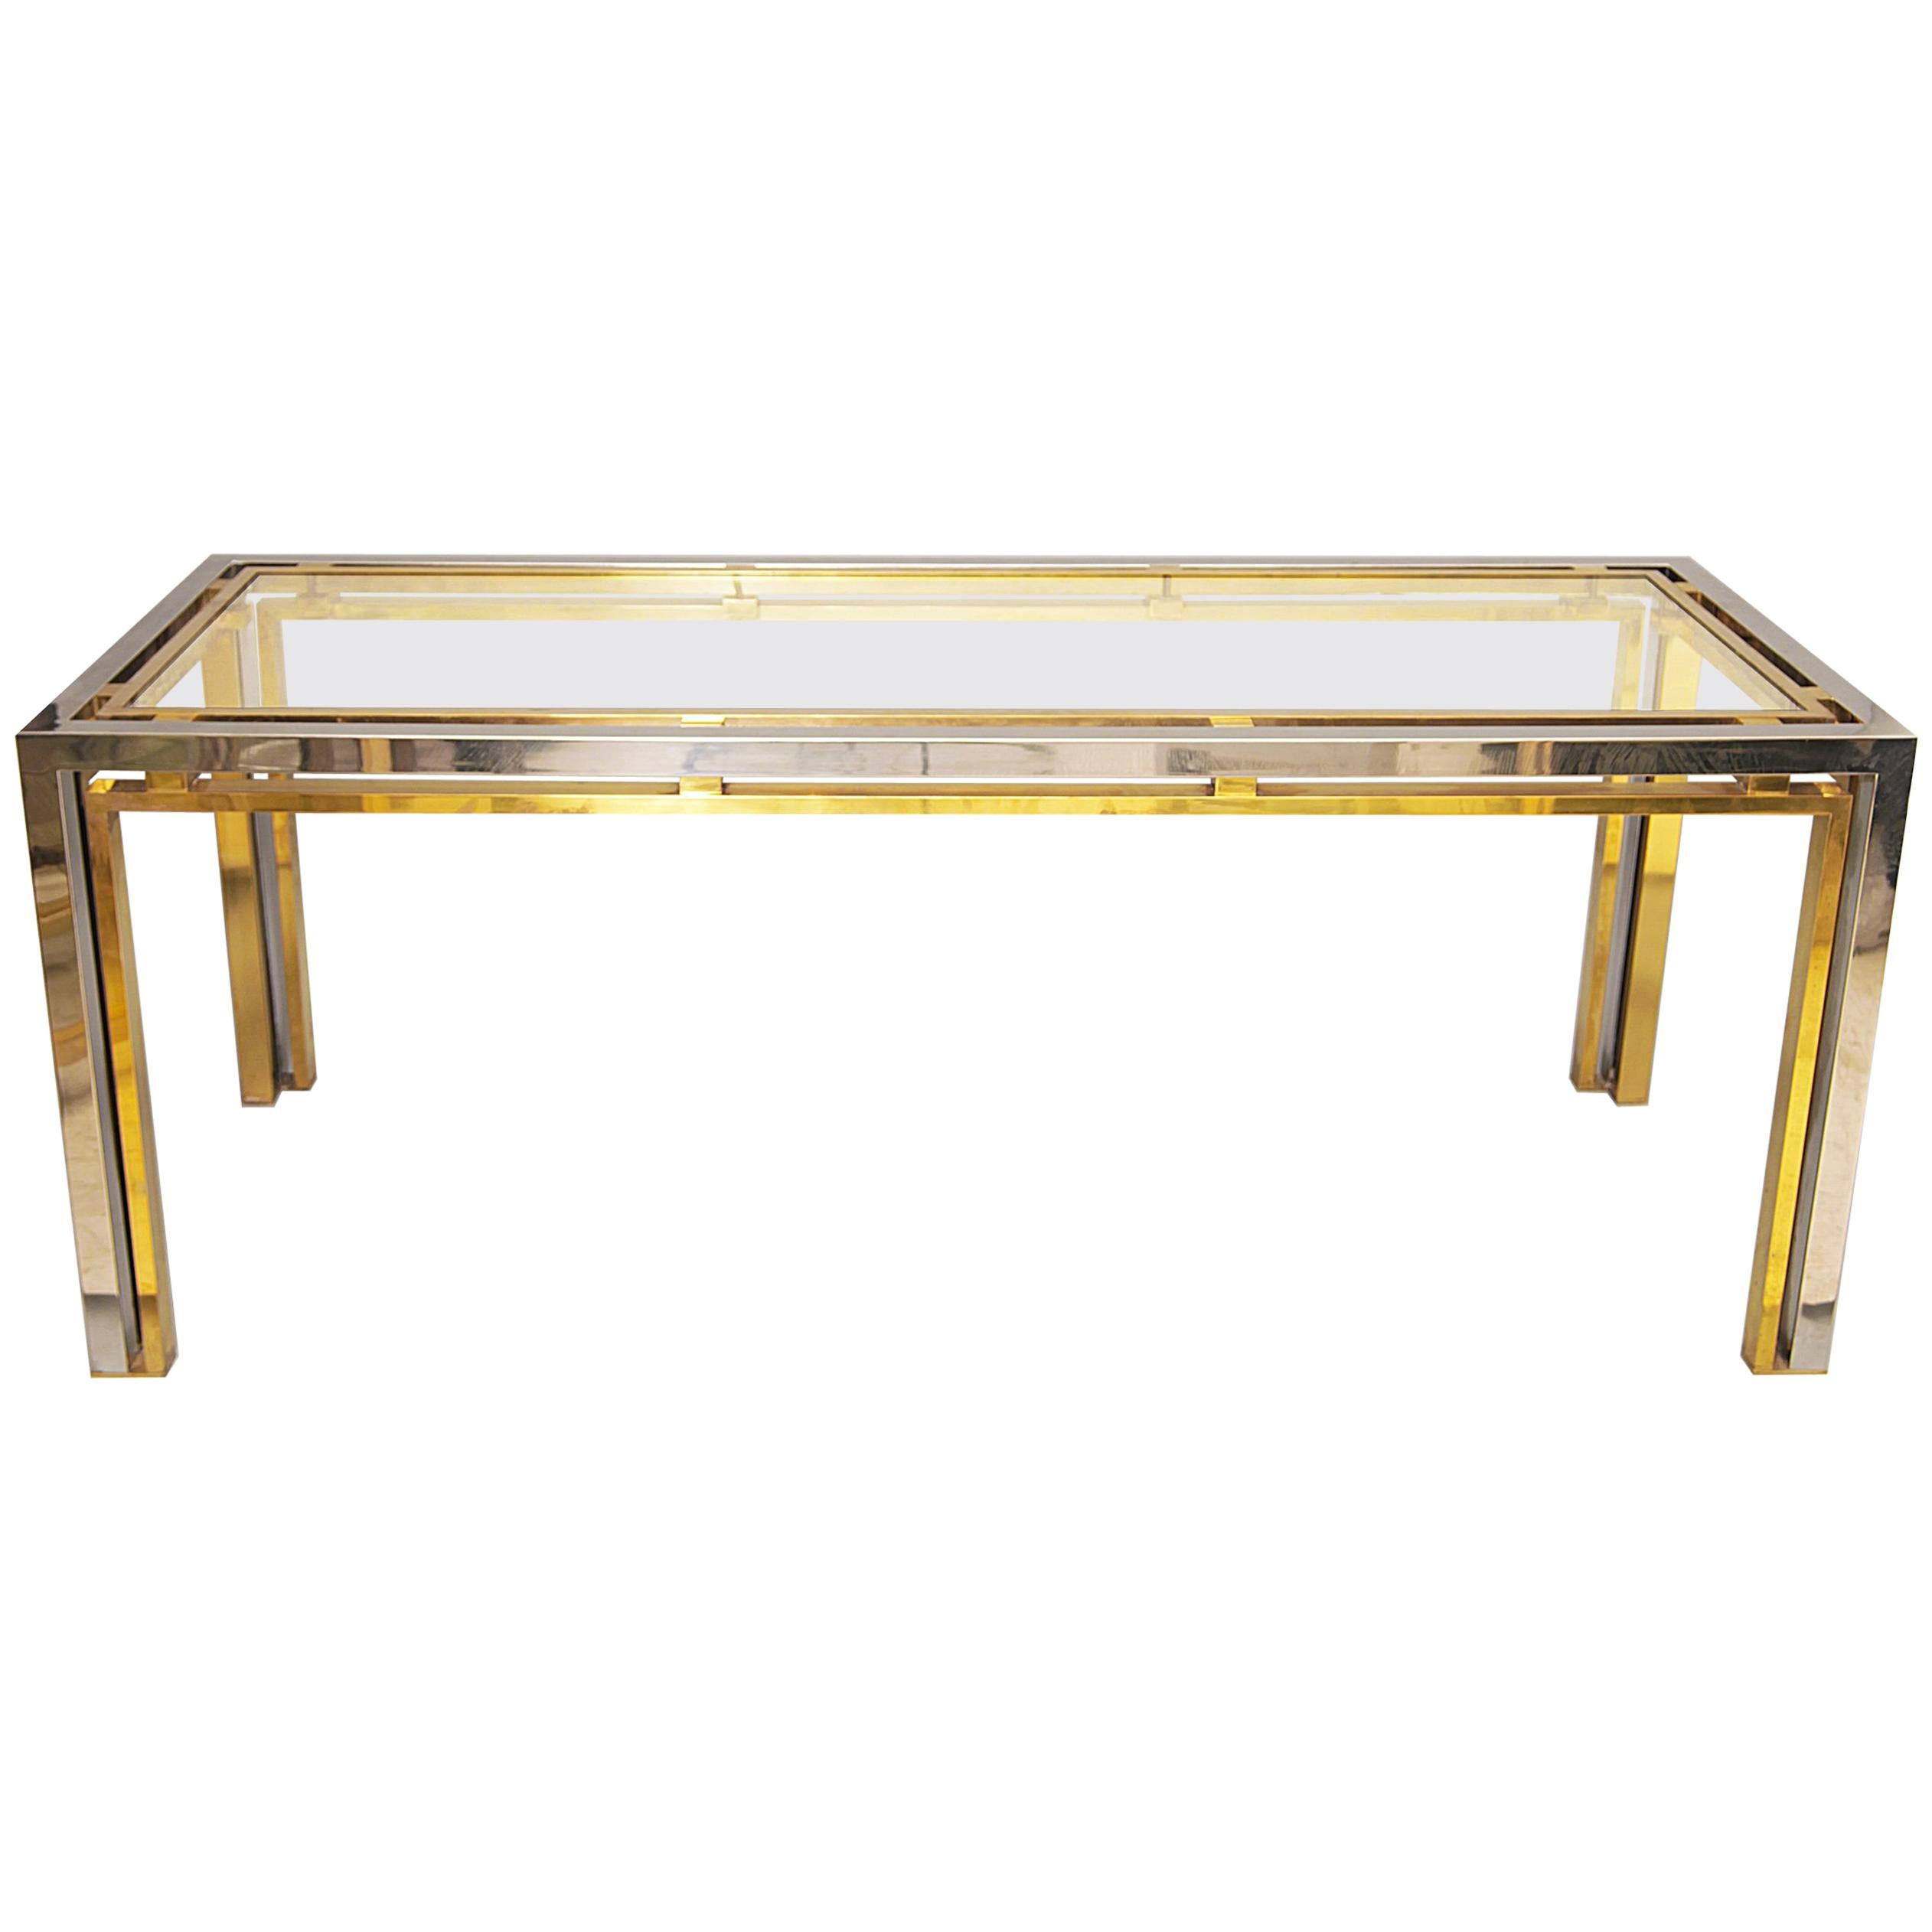 Romeo Rega Chrome and Brass with Glass Console Table, Desk or Sofa Table, 1970s For Sale